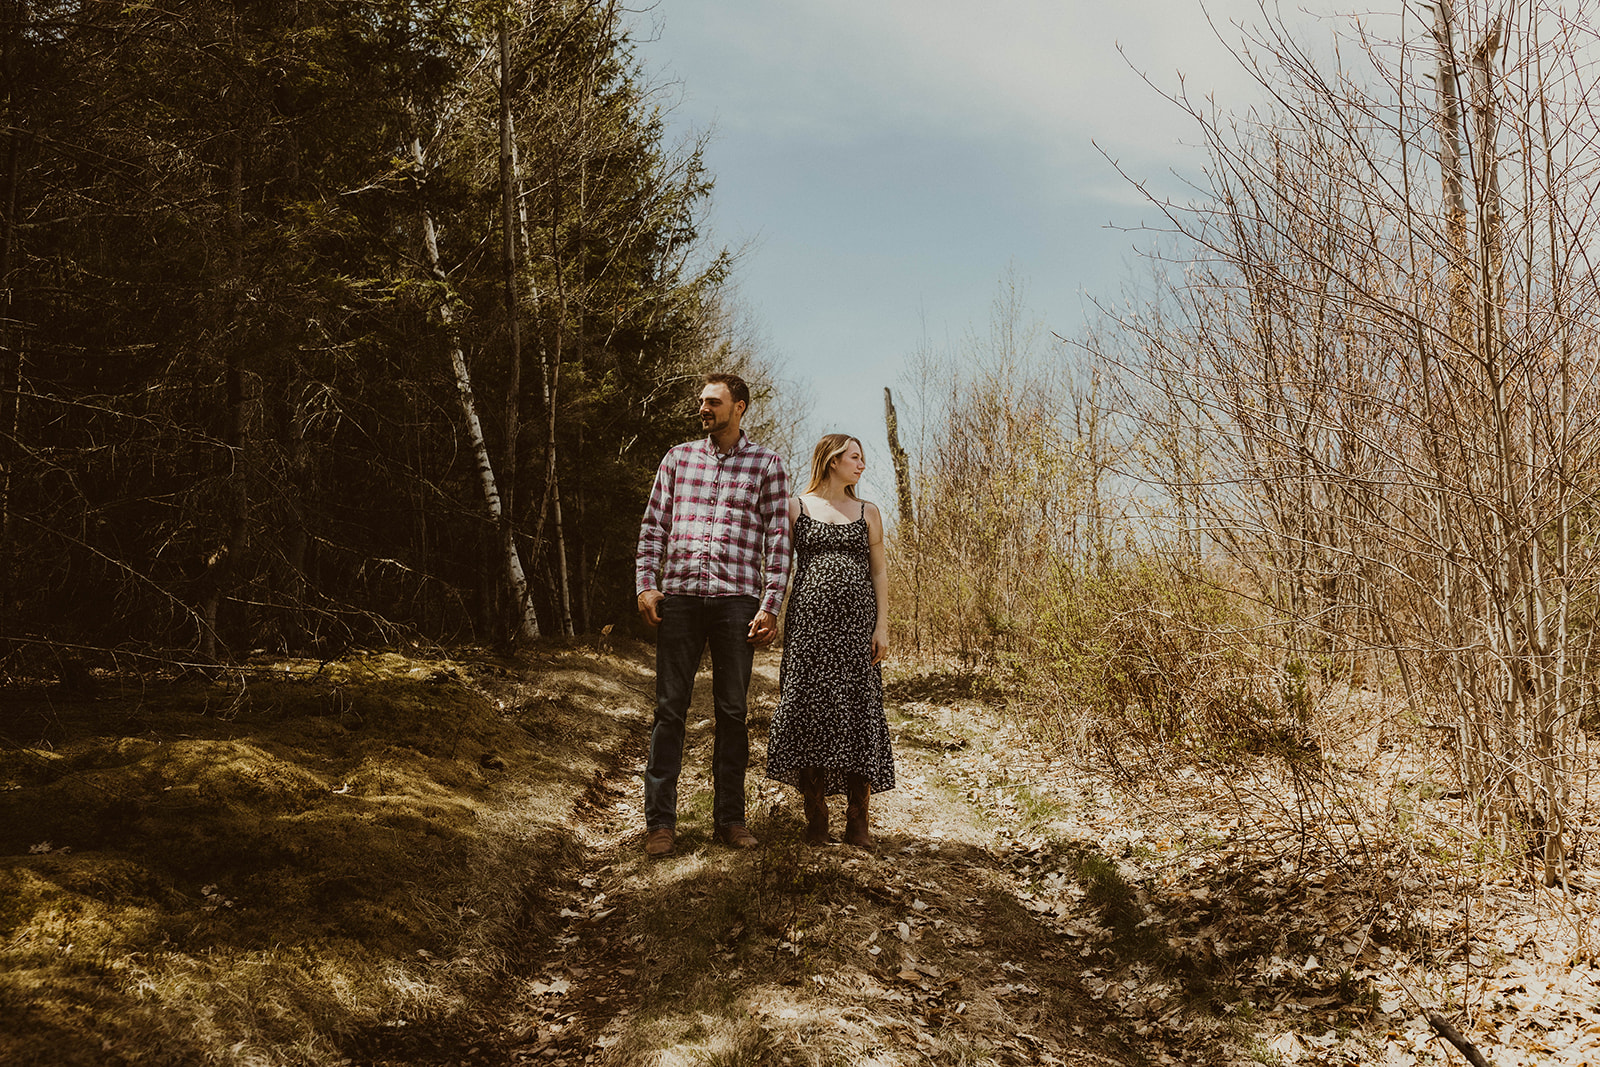 Future parents pose candidly together during their western maternity photos